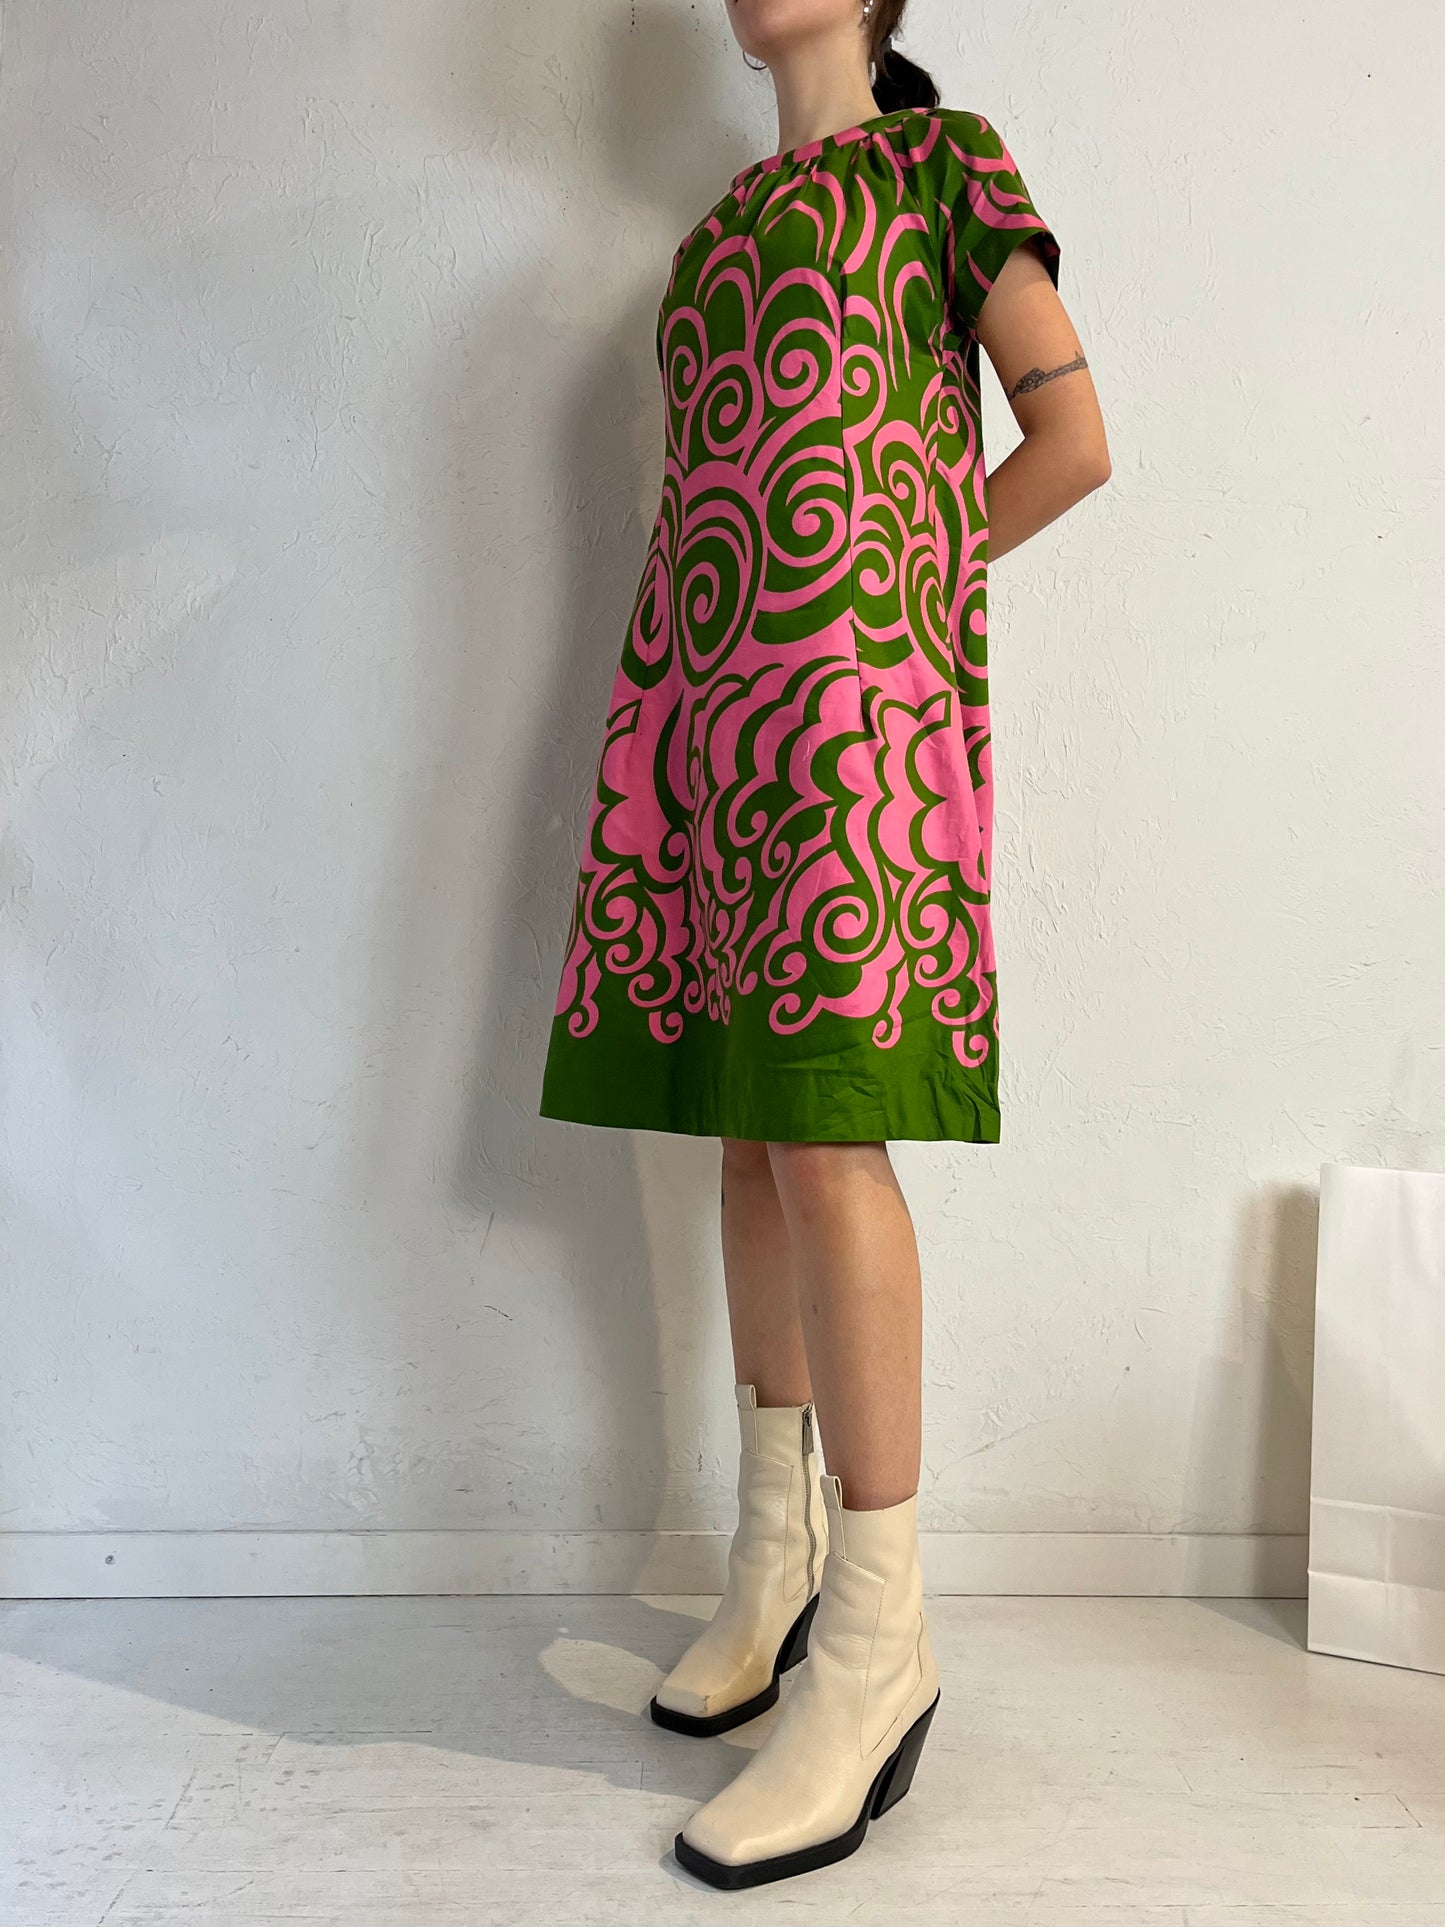 70s 'Rhapsody' Pink and Green Patterned Dress / Small